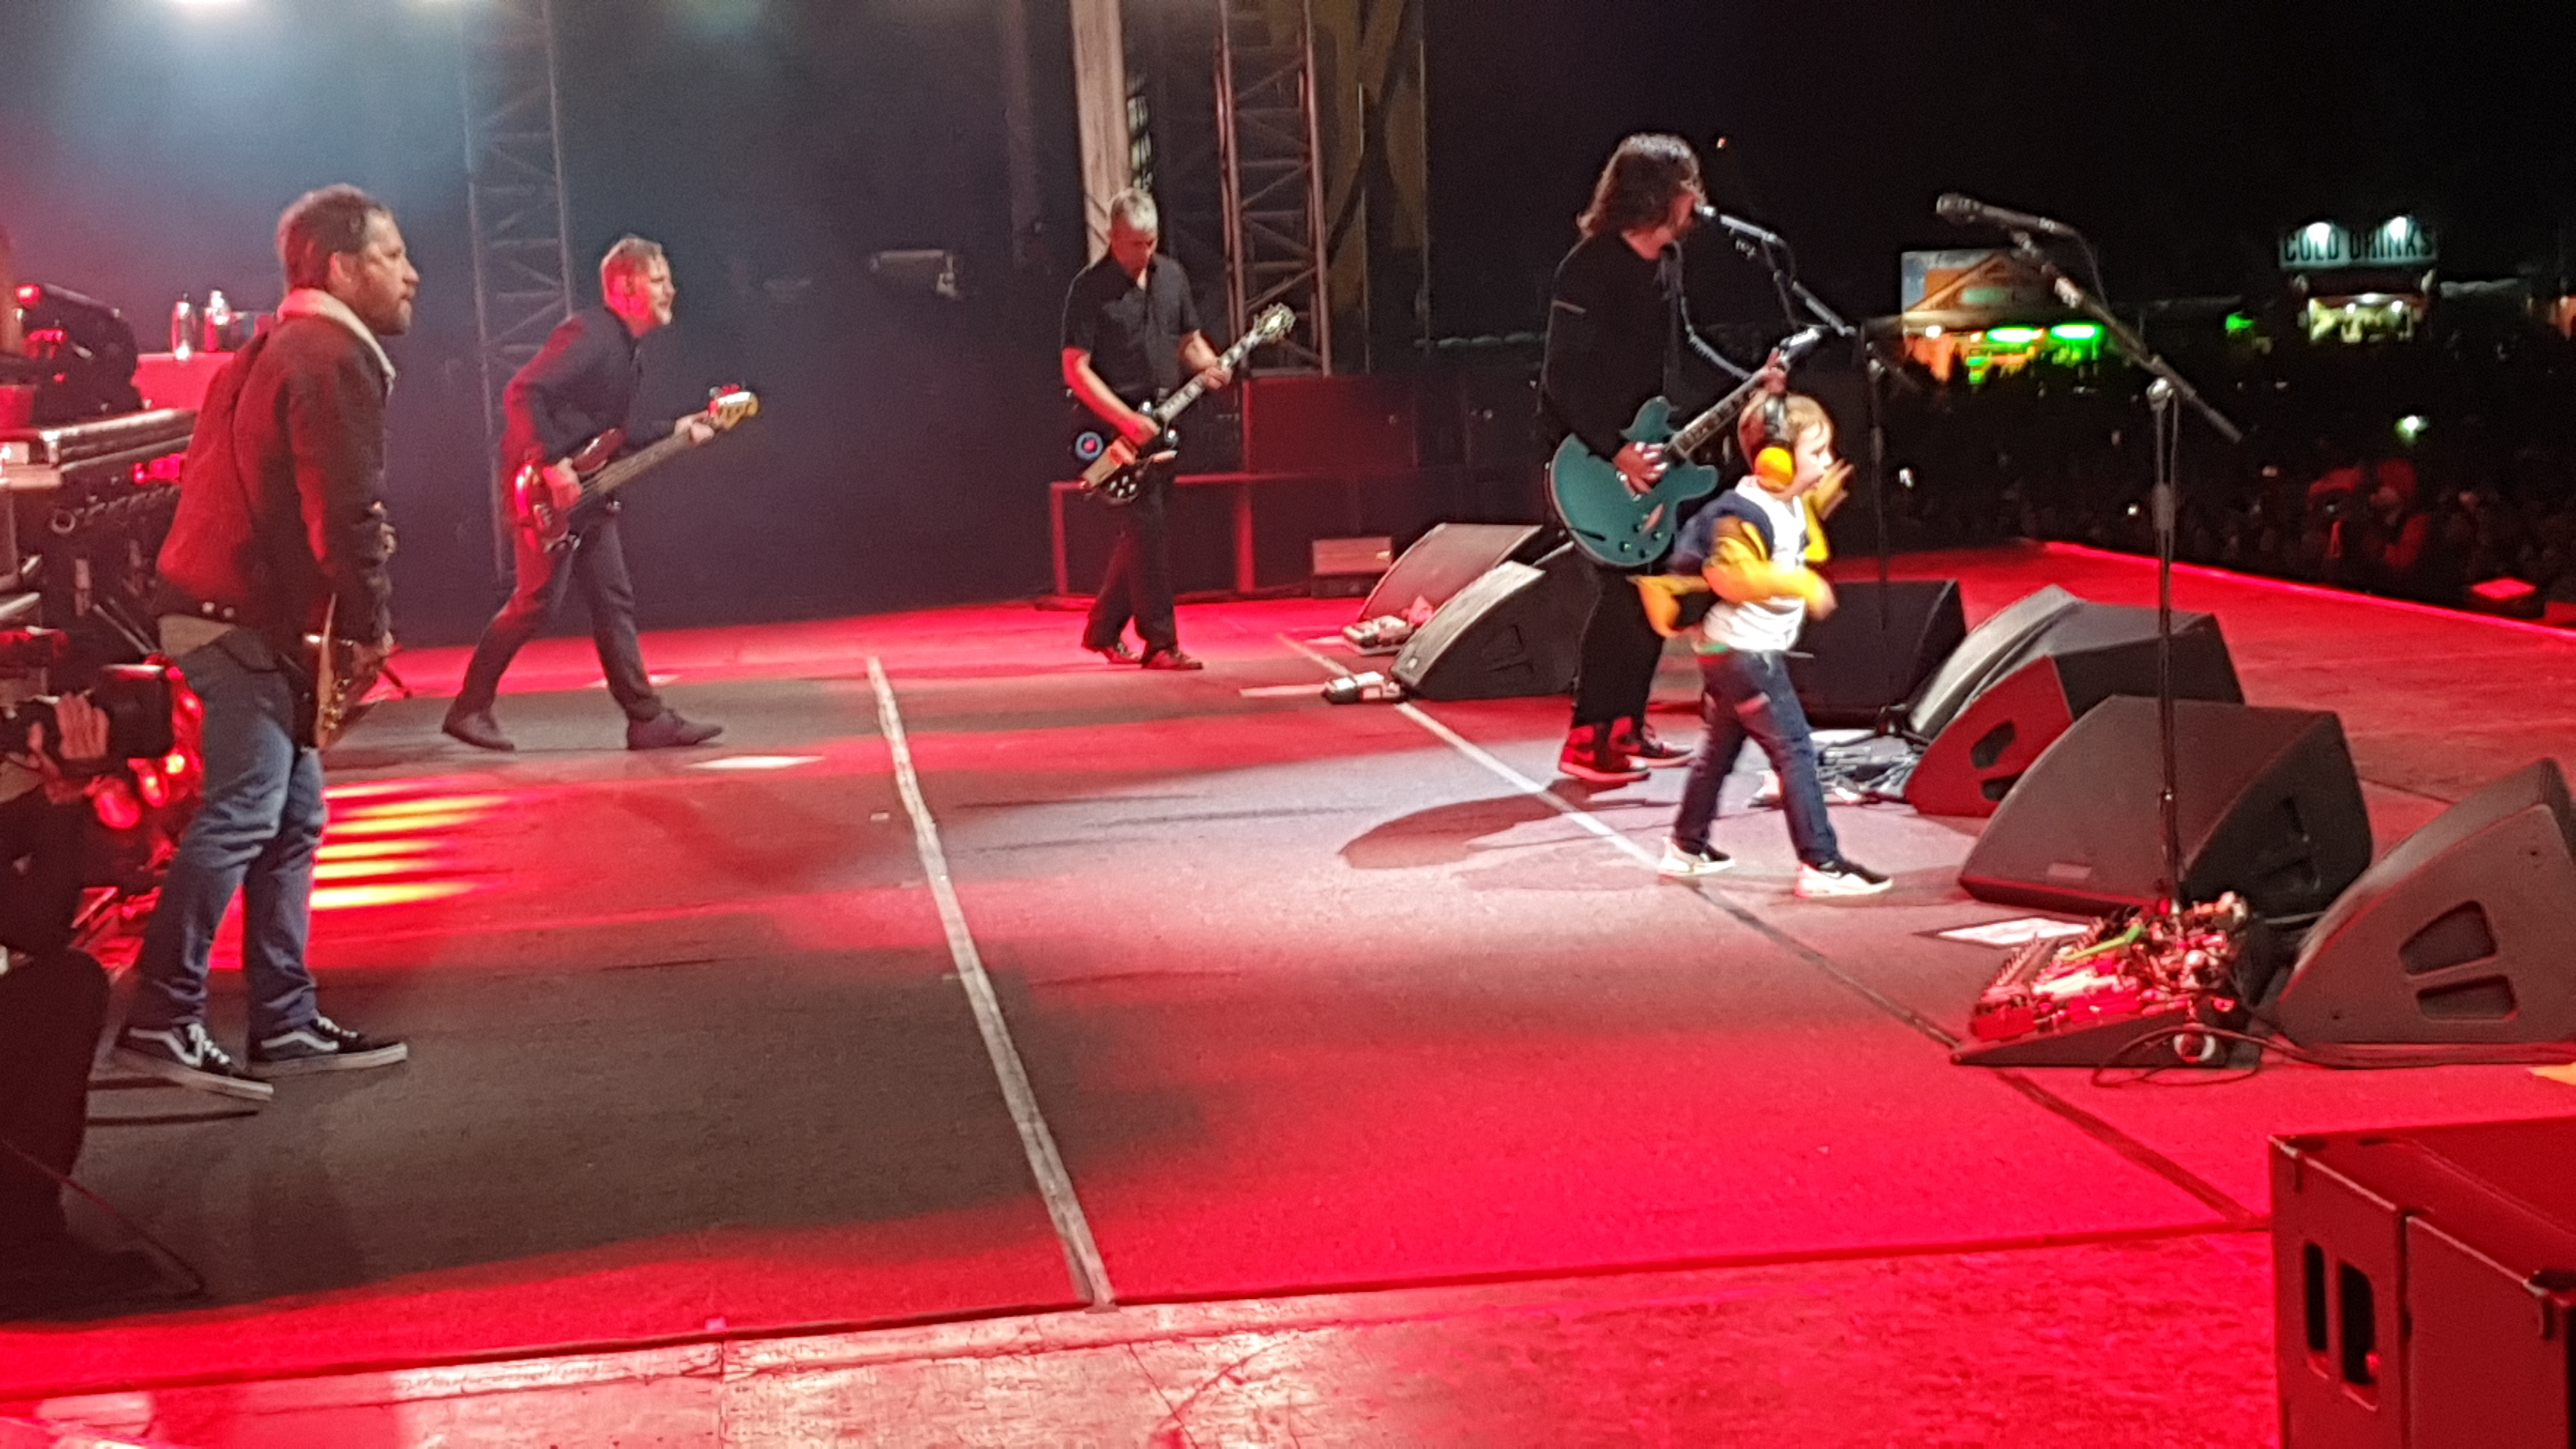 Taylor Blackburn, 5, rocking out on stage with the Foo Fighters